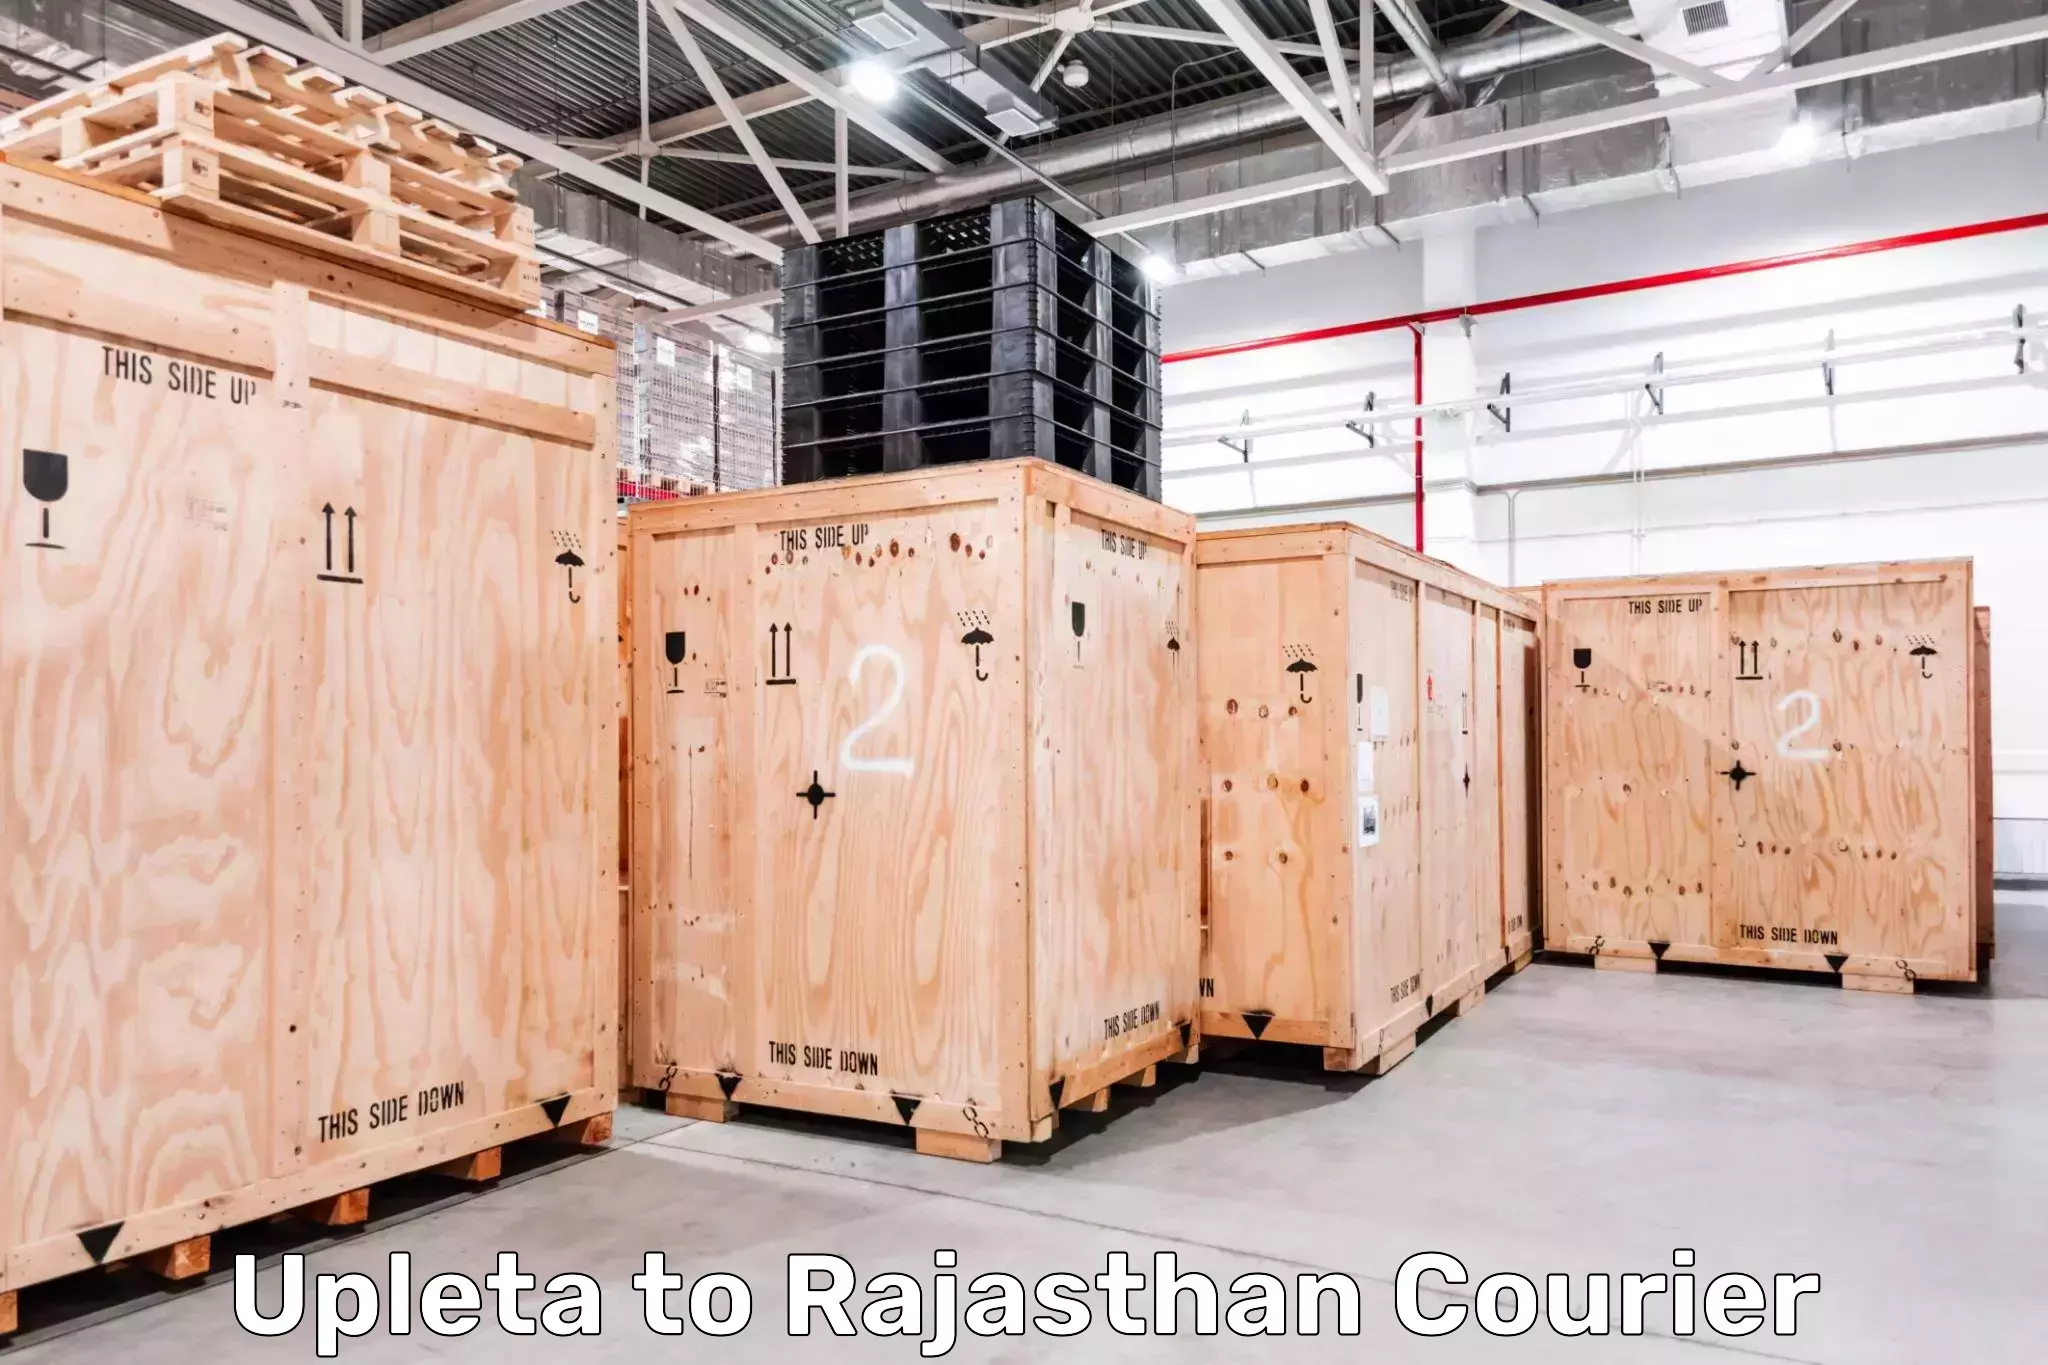 Multi-national courier services Upleta to Rajasthan